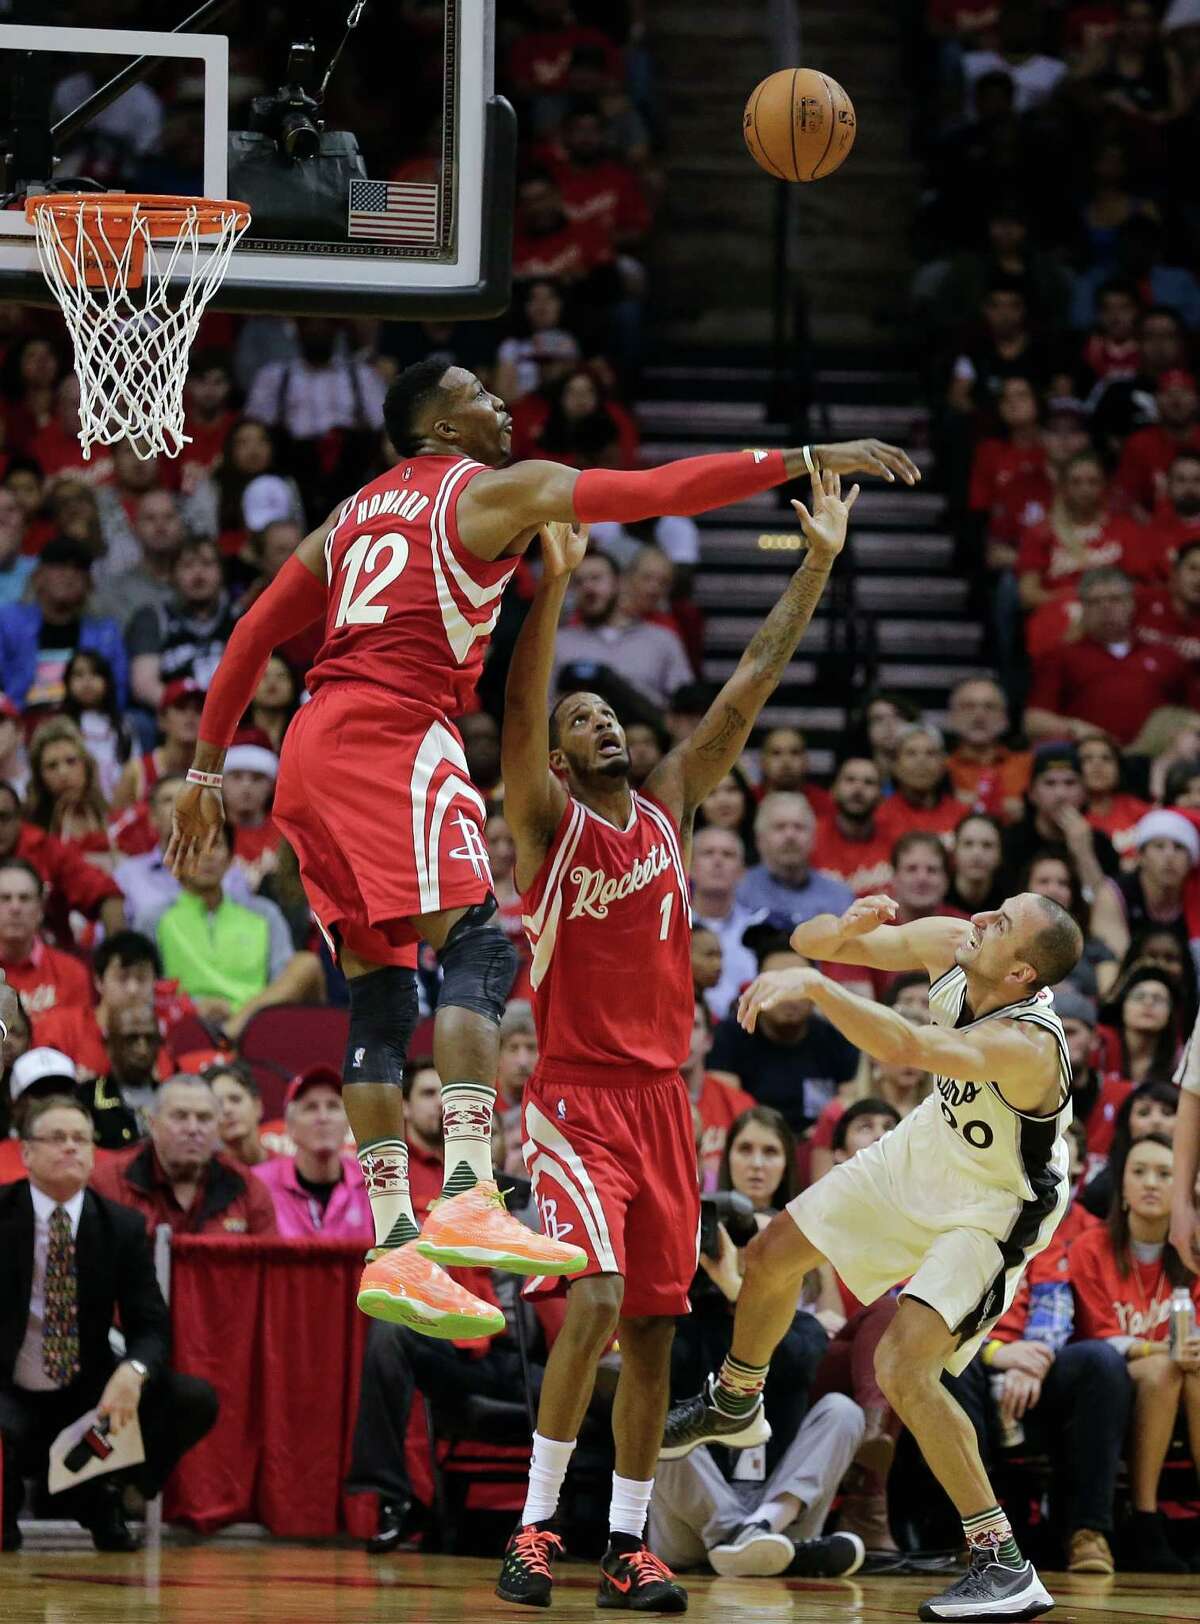 San Antonio Spurs guard Manu Ginobili (20) is fouled by Houston Rockets forward Trevor Ariza (1) as center Dwight Howard (12) blocks his shot attempt in the first half of an NBA basketball game Friday, Dec. 25, 2015, in Houston. (AP Photo/Bob Levey)